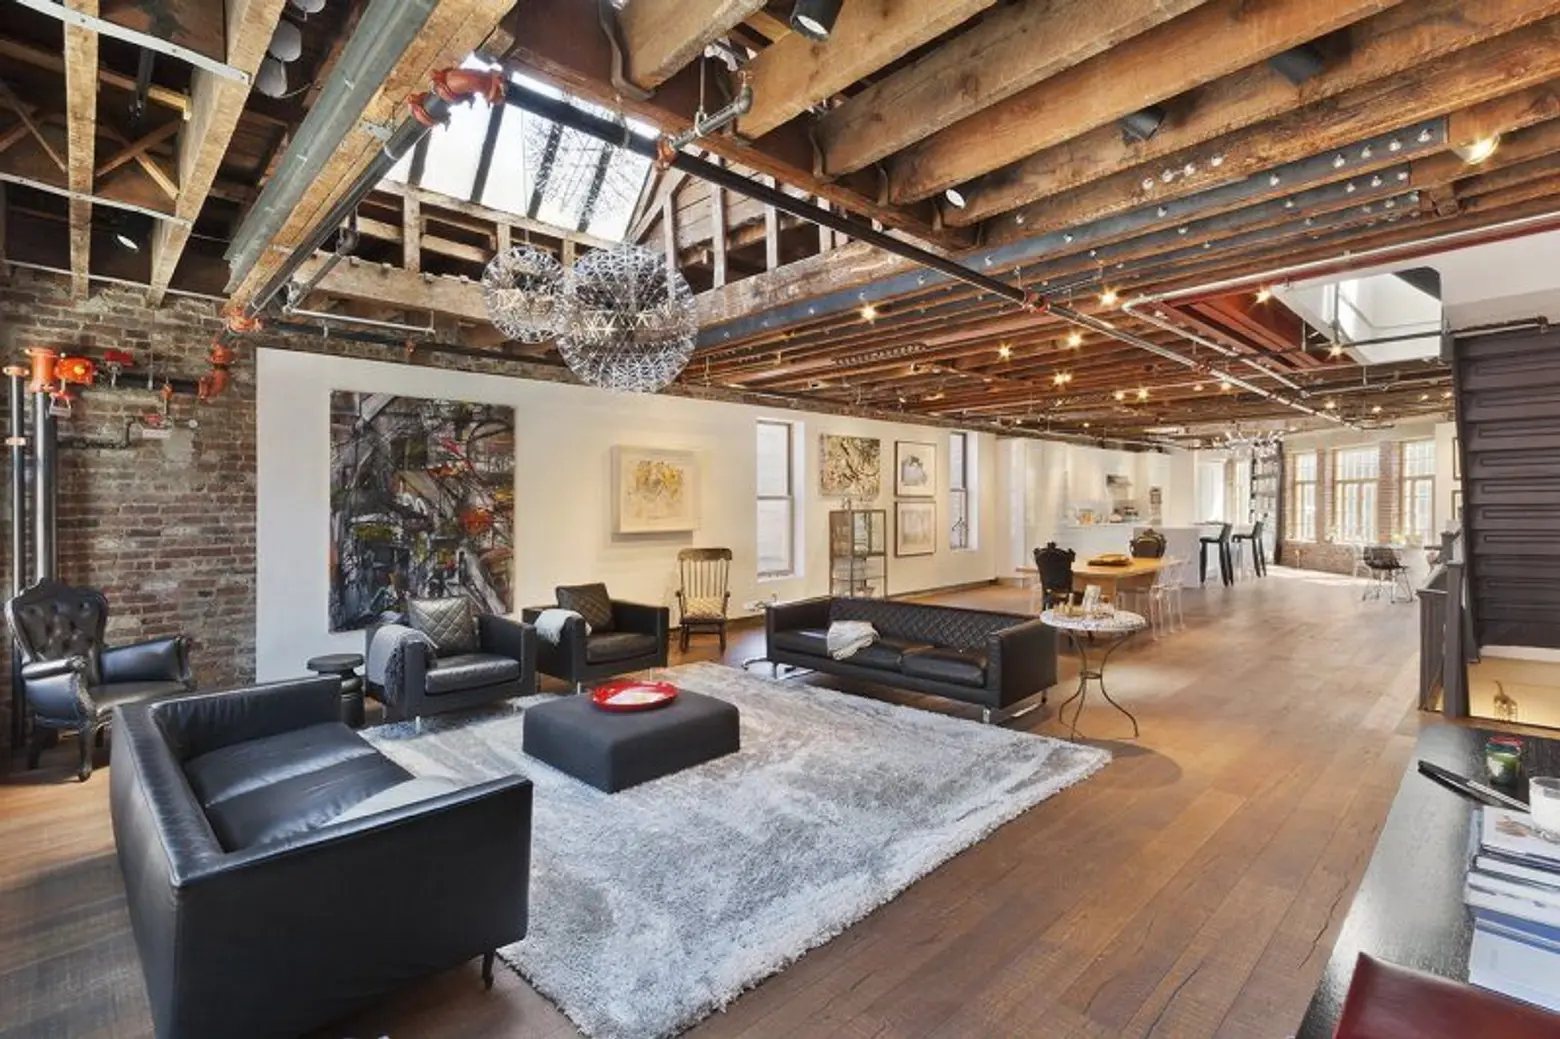 Live in a massive $8M West Village loft for just $1 a month